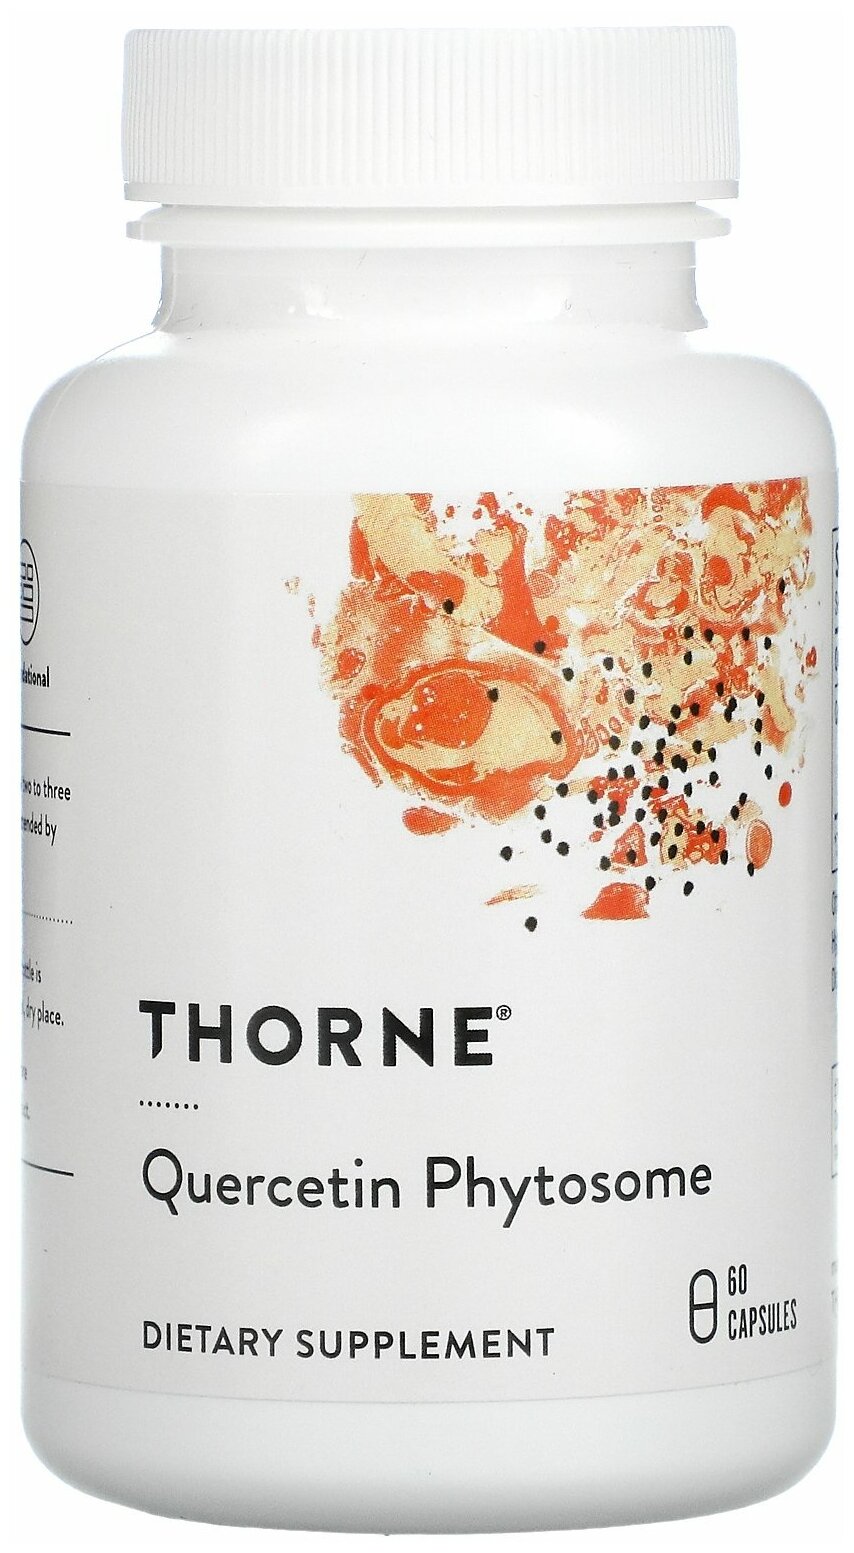 Thorne Research Quercetin Phytosome 60 Capsules